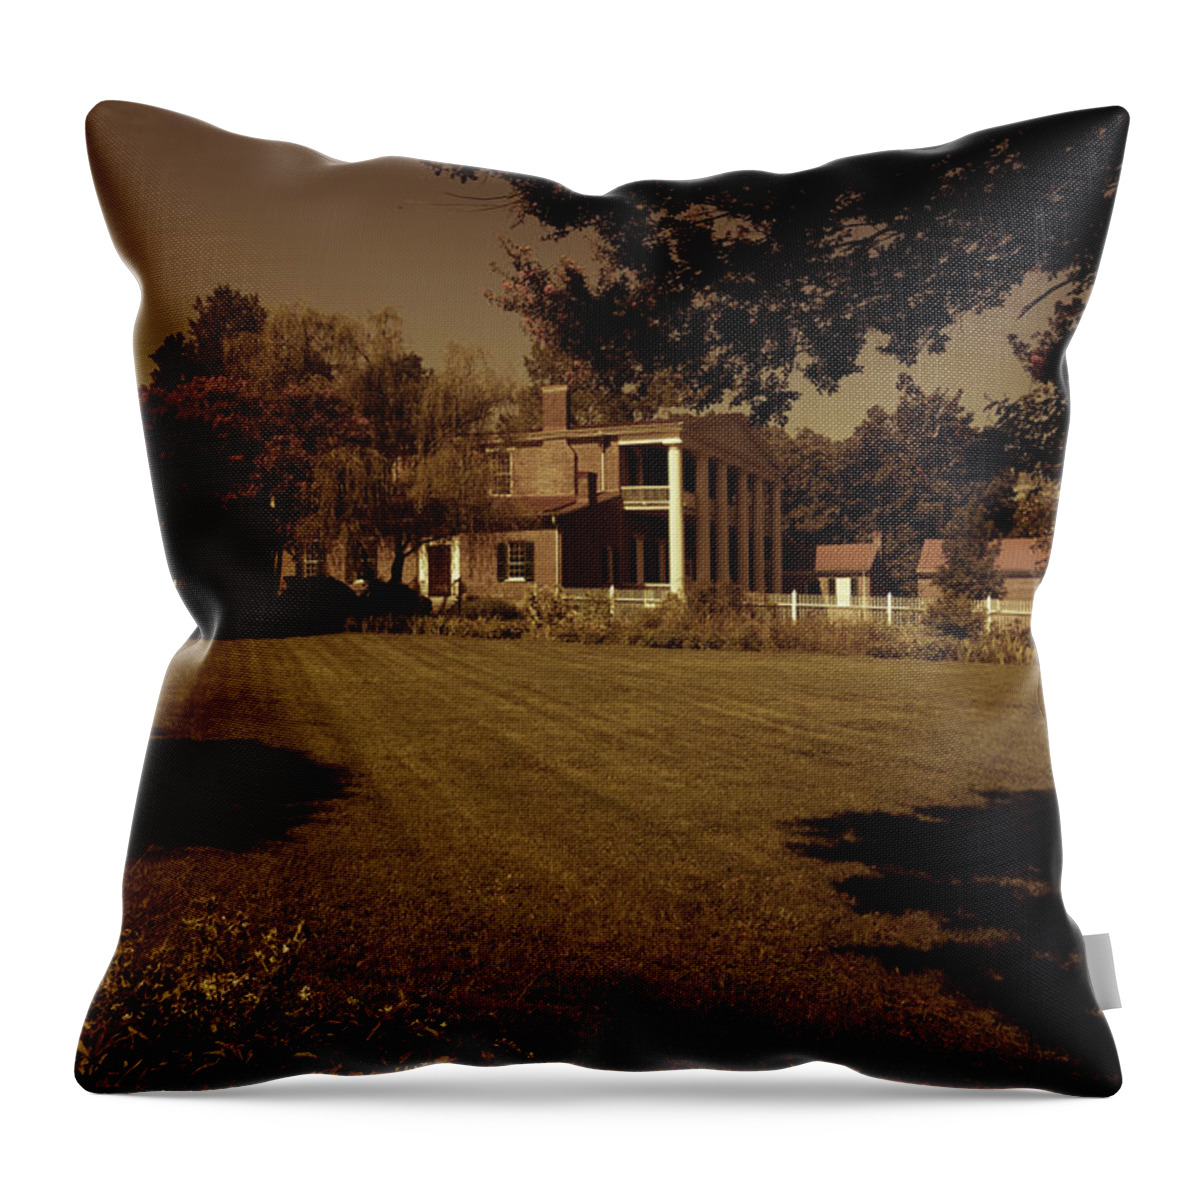 Hermitage Throw Pillow featuring the photograph Fading Glory - The Hermitage by James L Bartlett